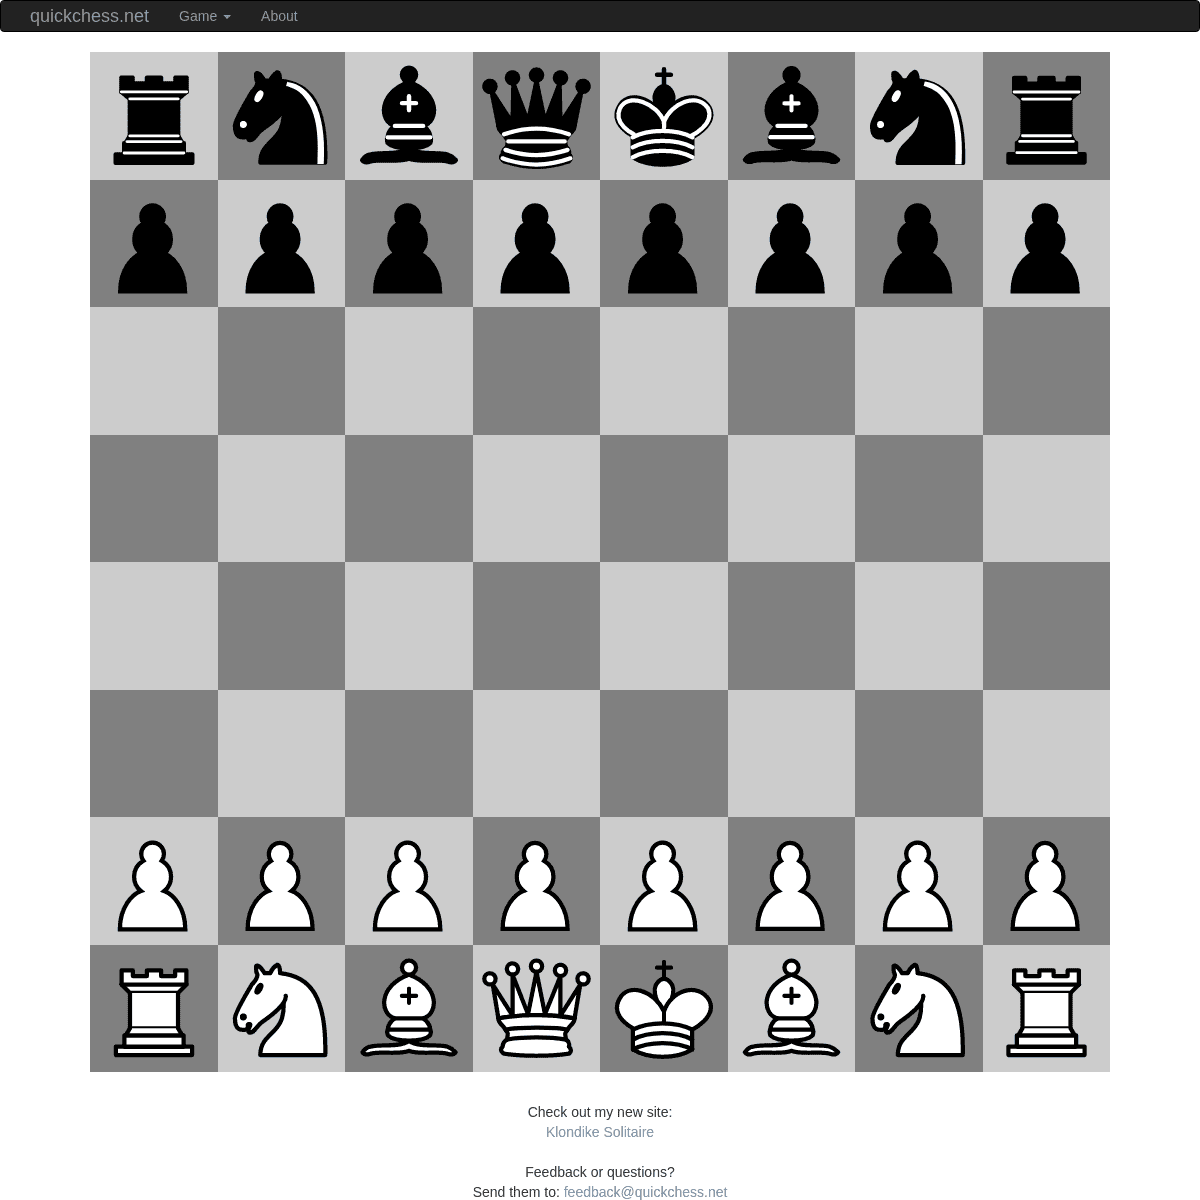 A complete backup of quickchess.net